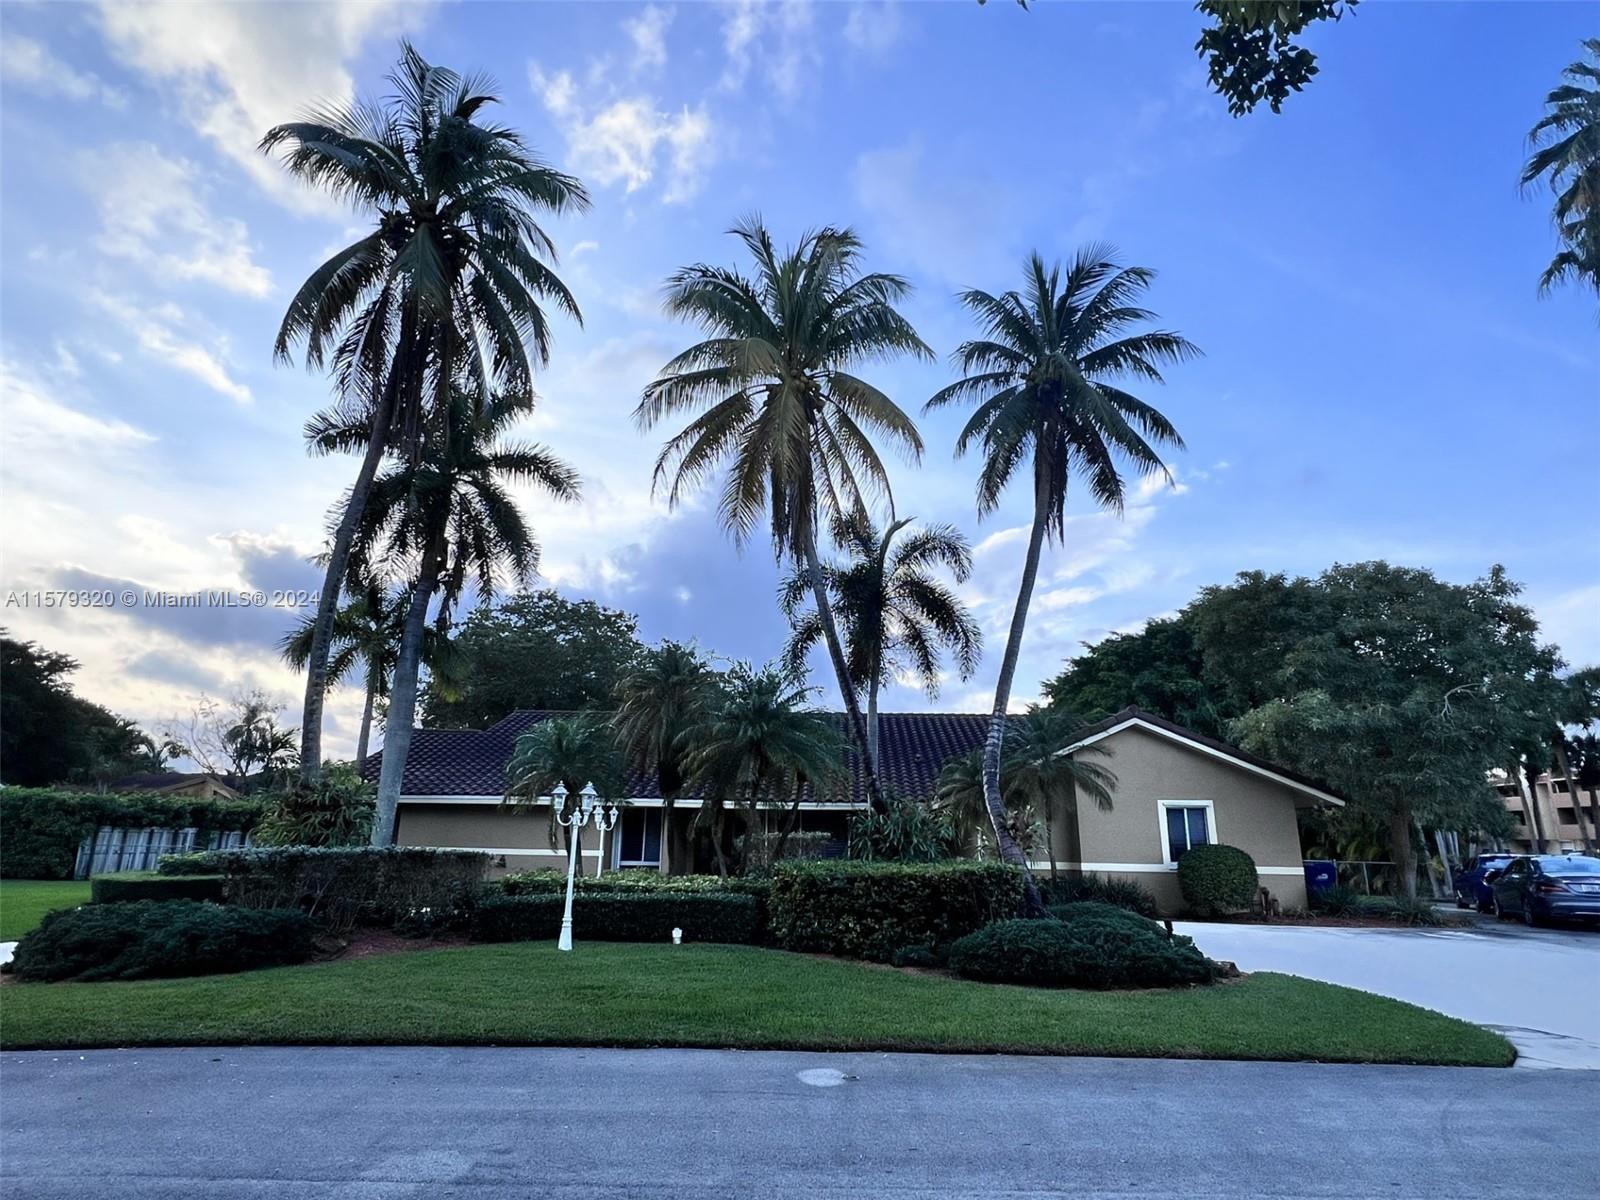 a palm tree sitting in front of a house with a garden